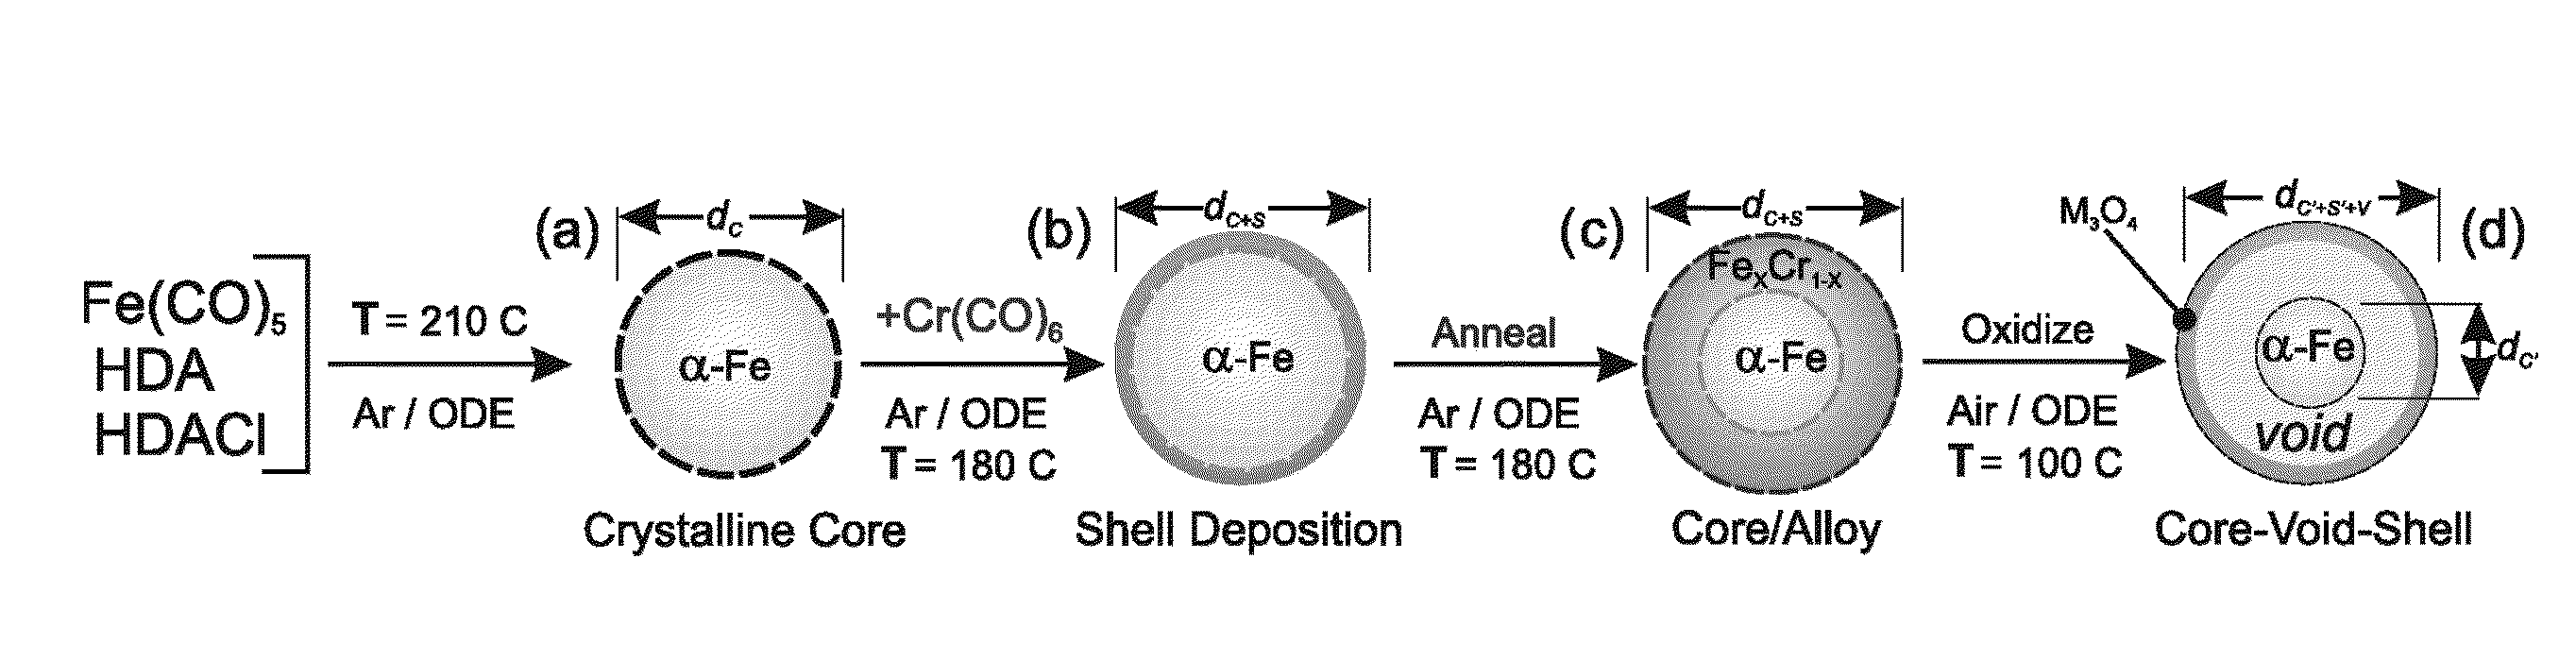 Method to control void formation in nanomaterials using core/alloy nanoparticles with stainless interfaces